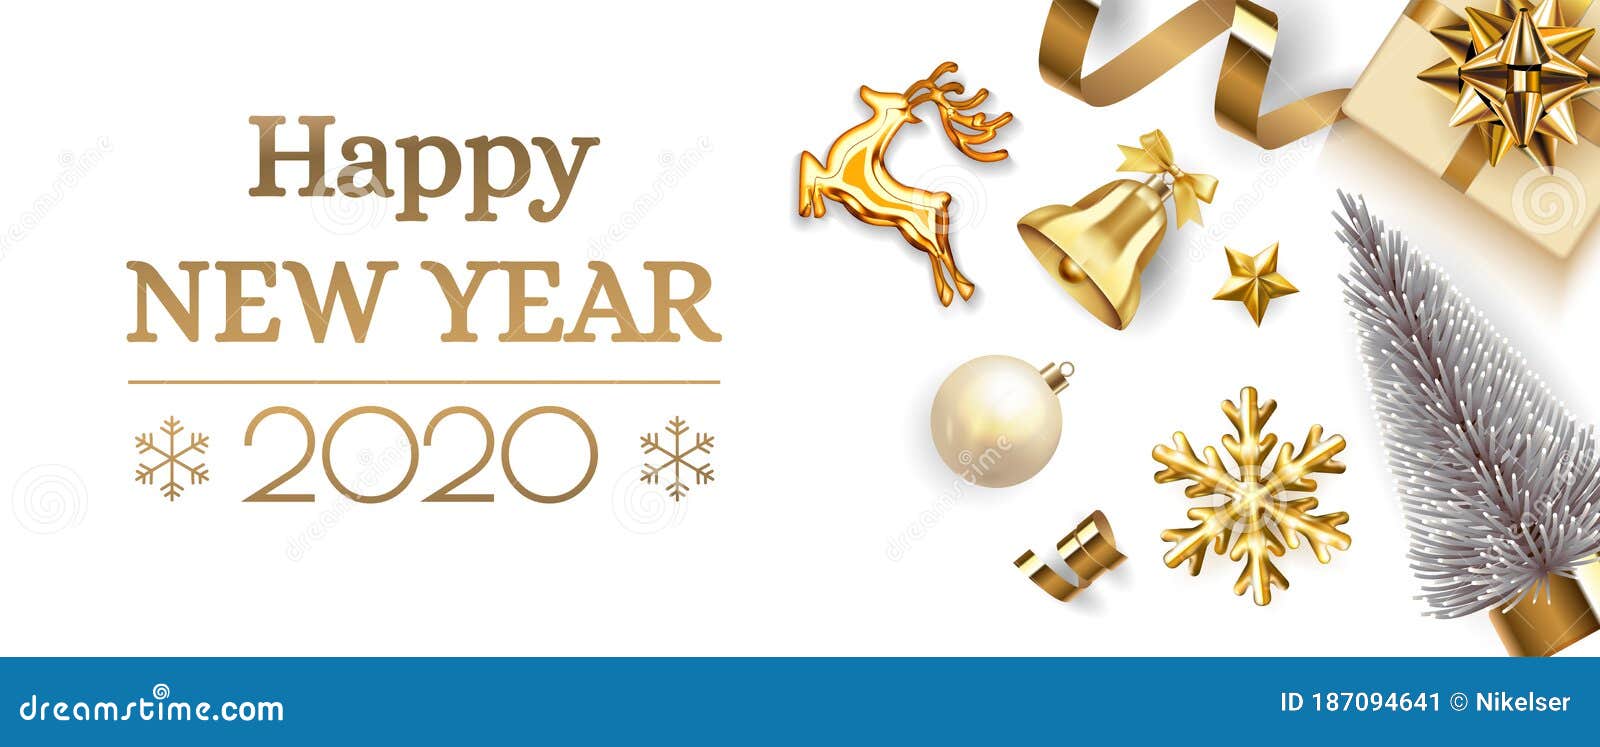 Happy New Year 2020 Banner. Merry Xmas Design with Gold Gift Box ...